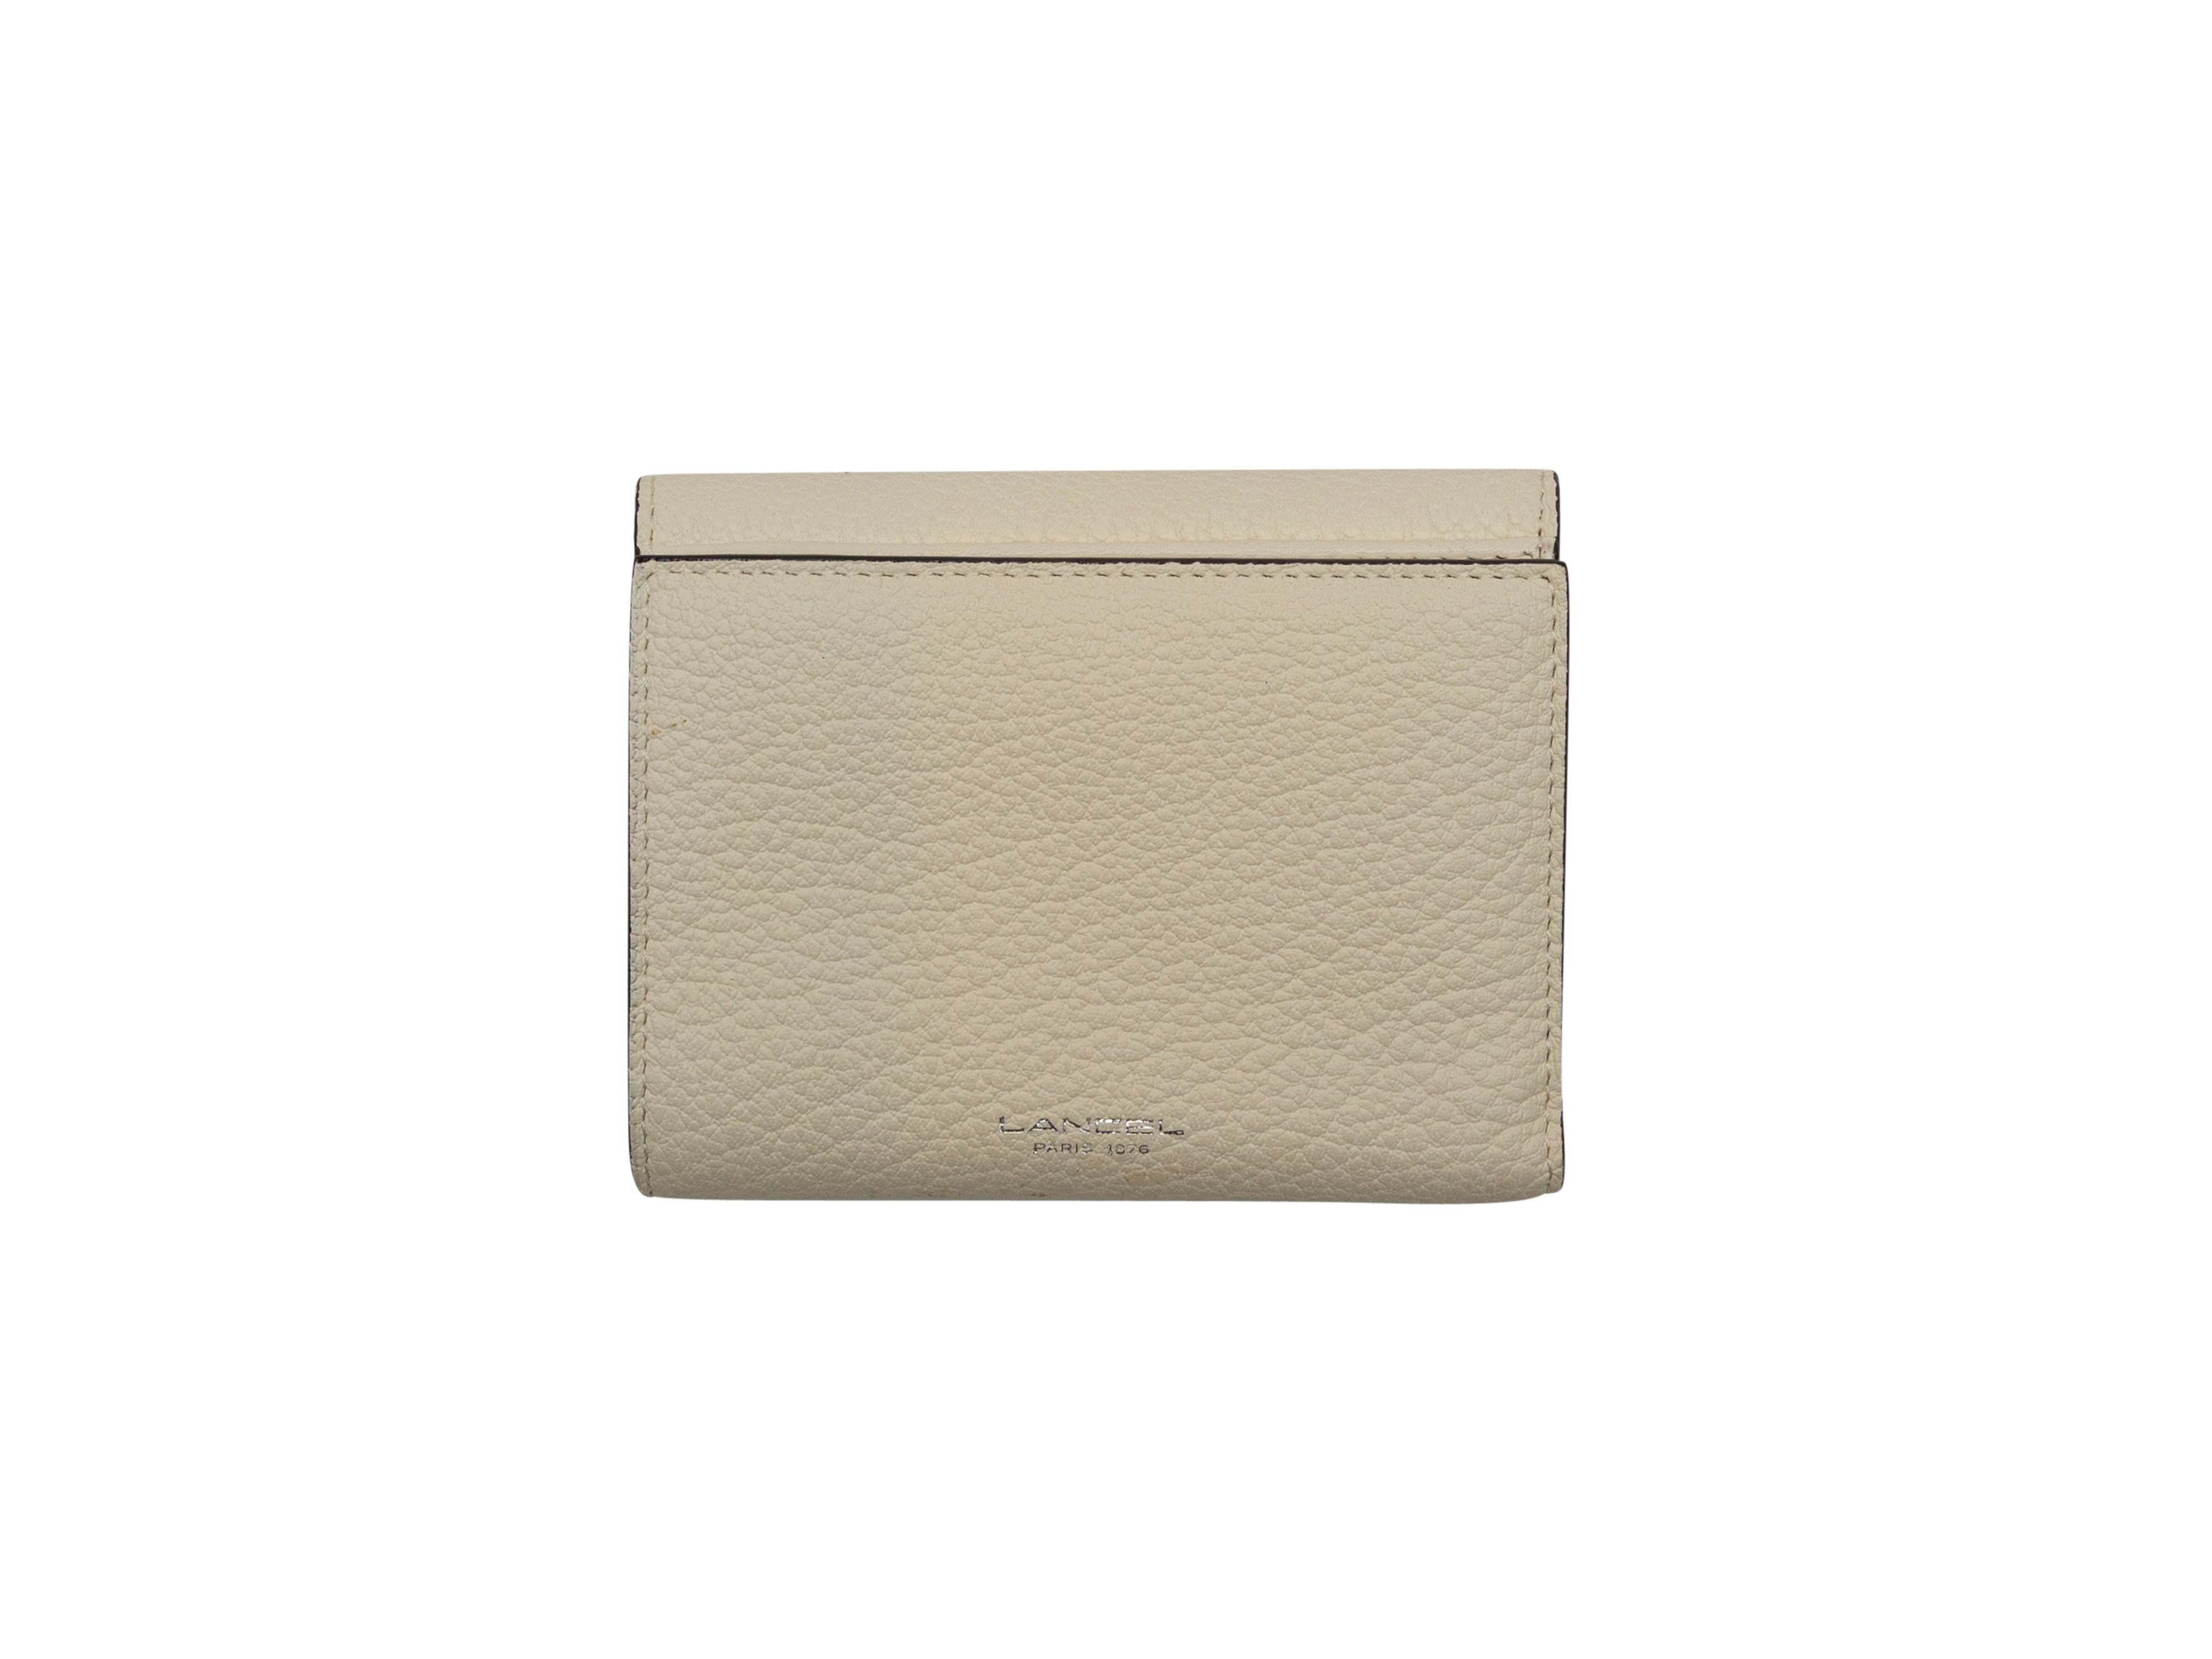 Product details: Beige leather wallet by Lancel. Interior card and cash slots. Snap closure at front. 4